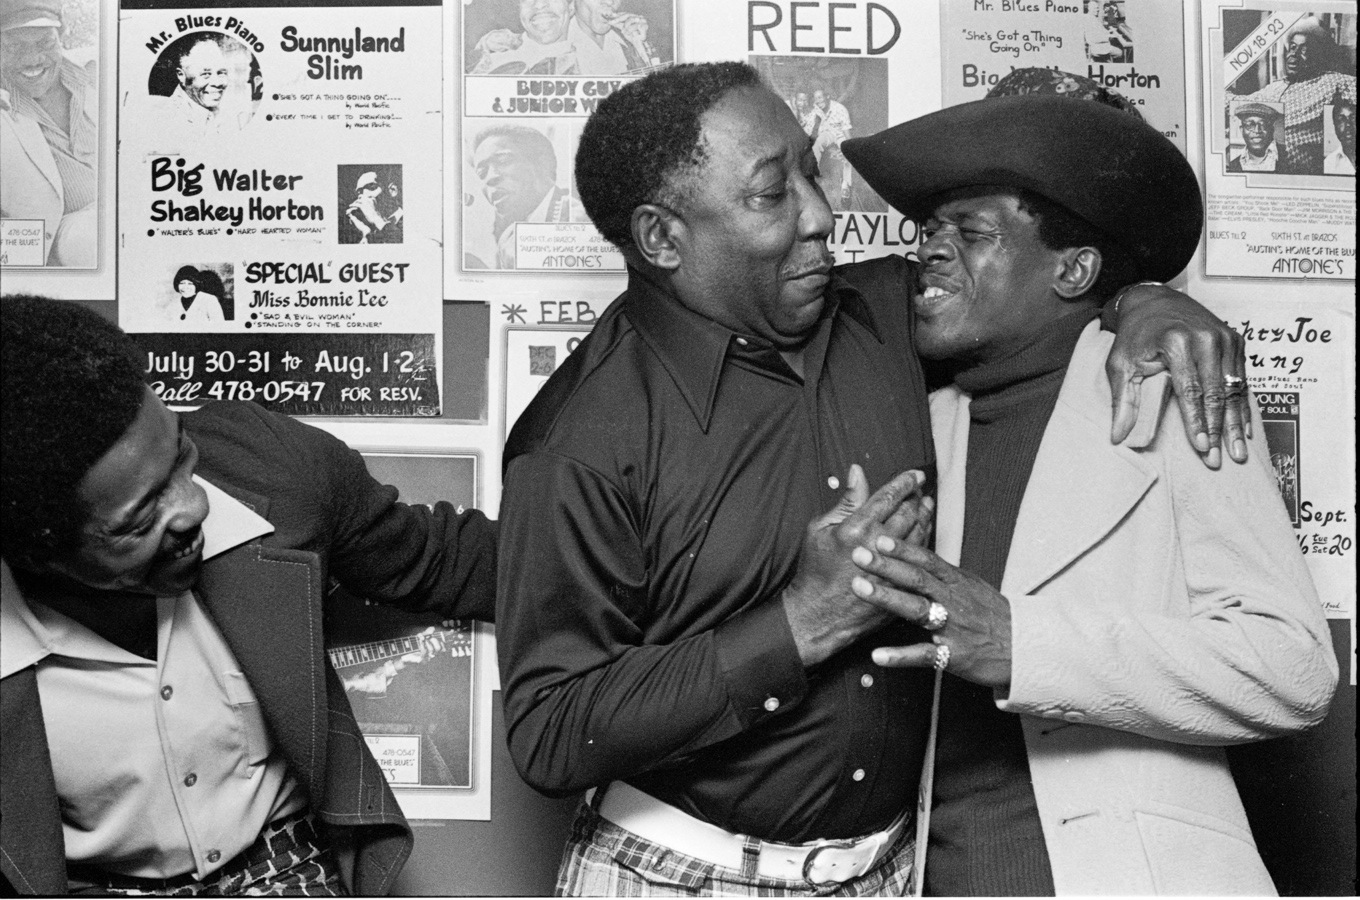 Buddy Guy, the Late Muddy Waters & the Late Jr. Wells (Muddy’s B’day).